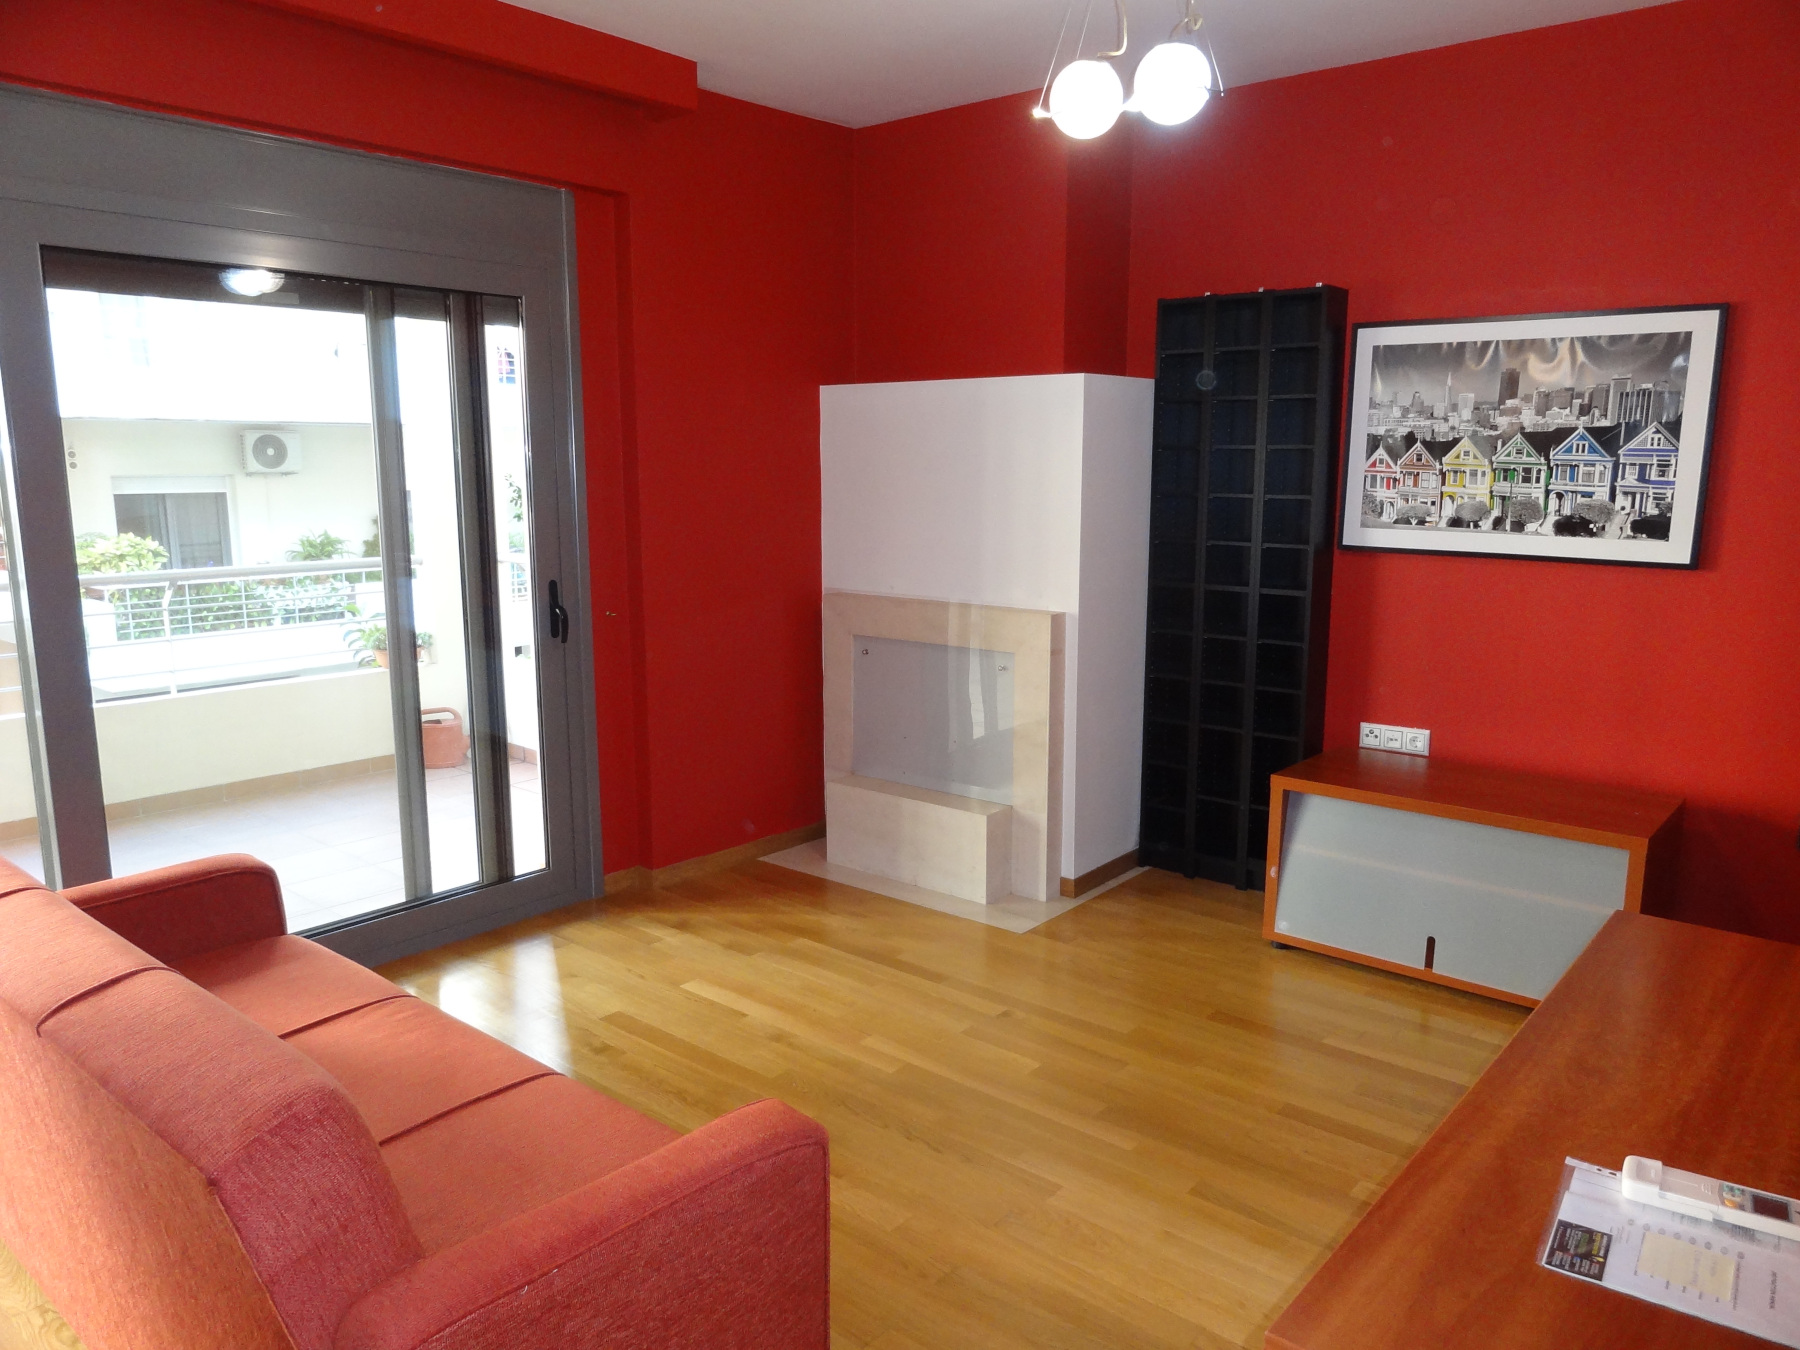 For rent bright furnished 2-room apartment built in 2010 55 sq.m. 1st floor in the area of the Nursing Home in Ioannina